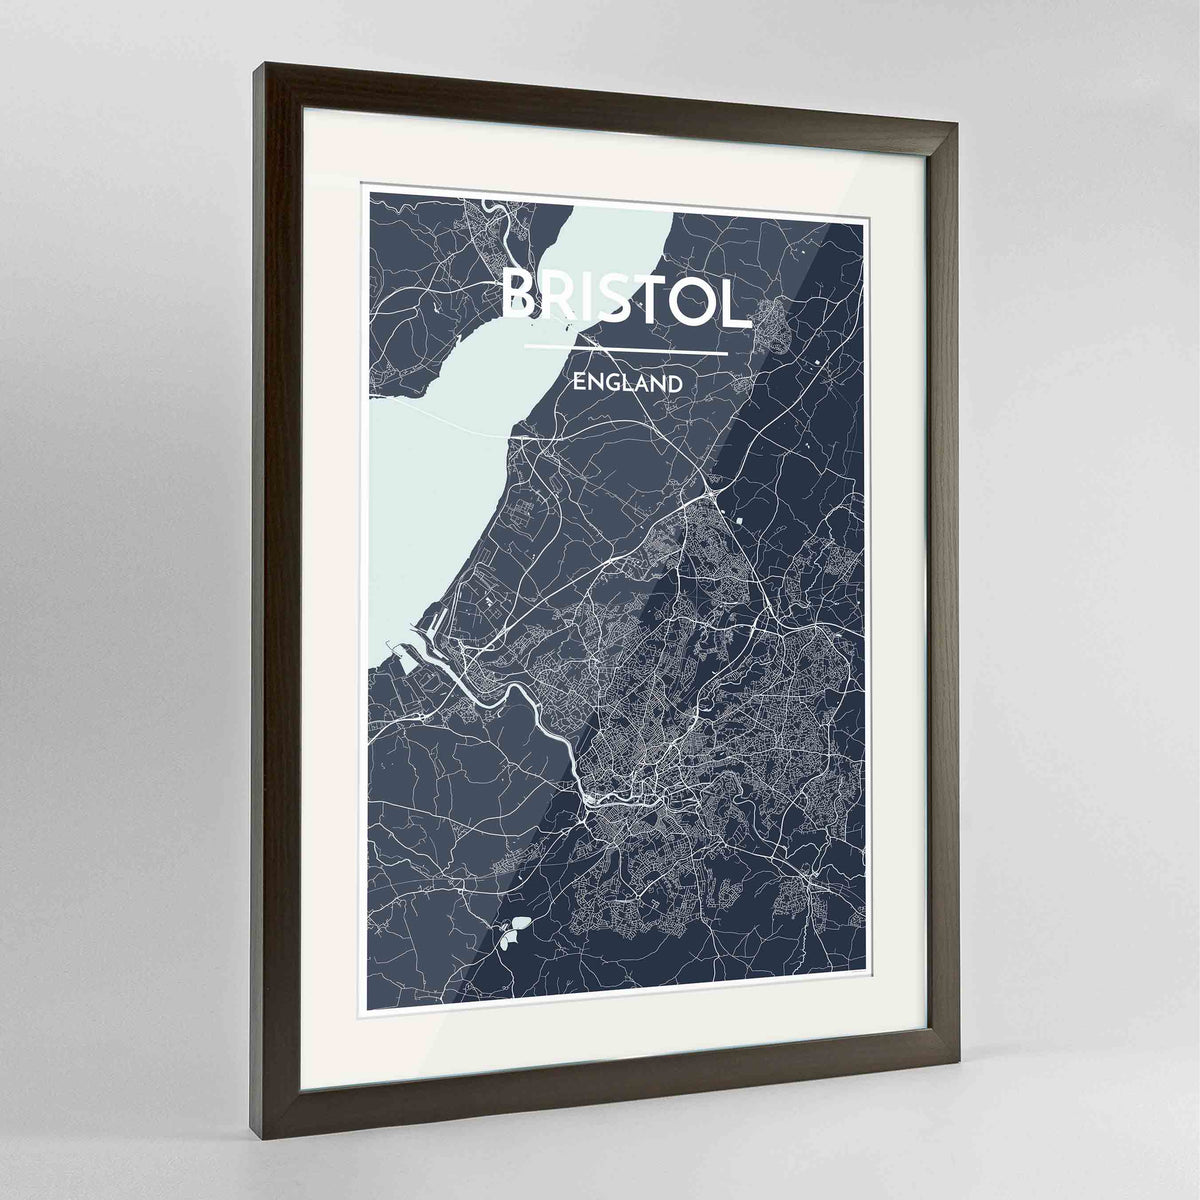 Framed Bristol Map Art Print 24x36&quot; Contemporary Walnut frame Point Two Design Group